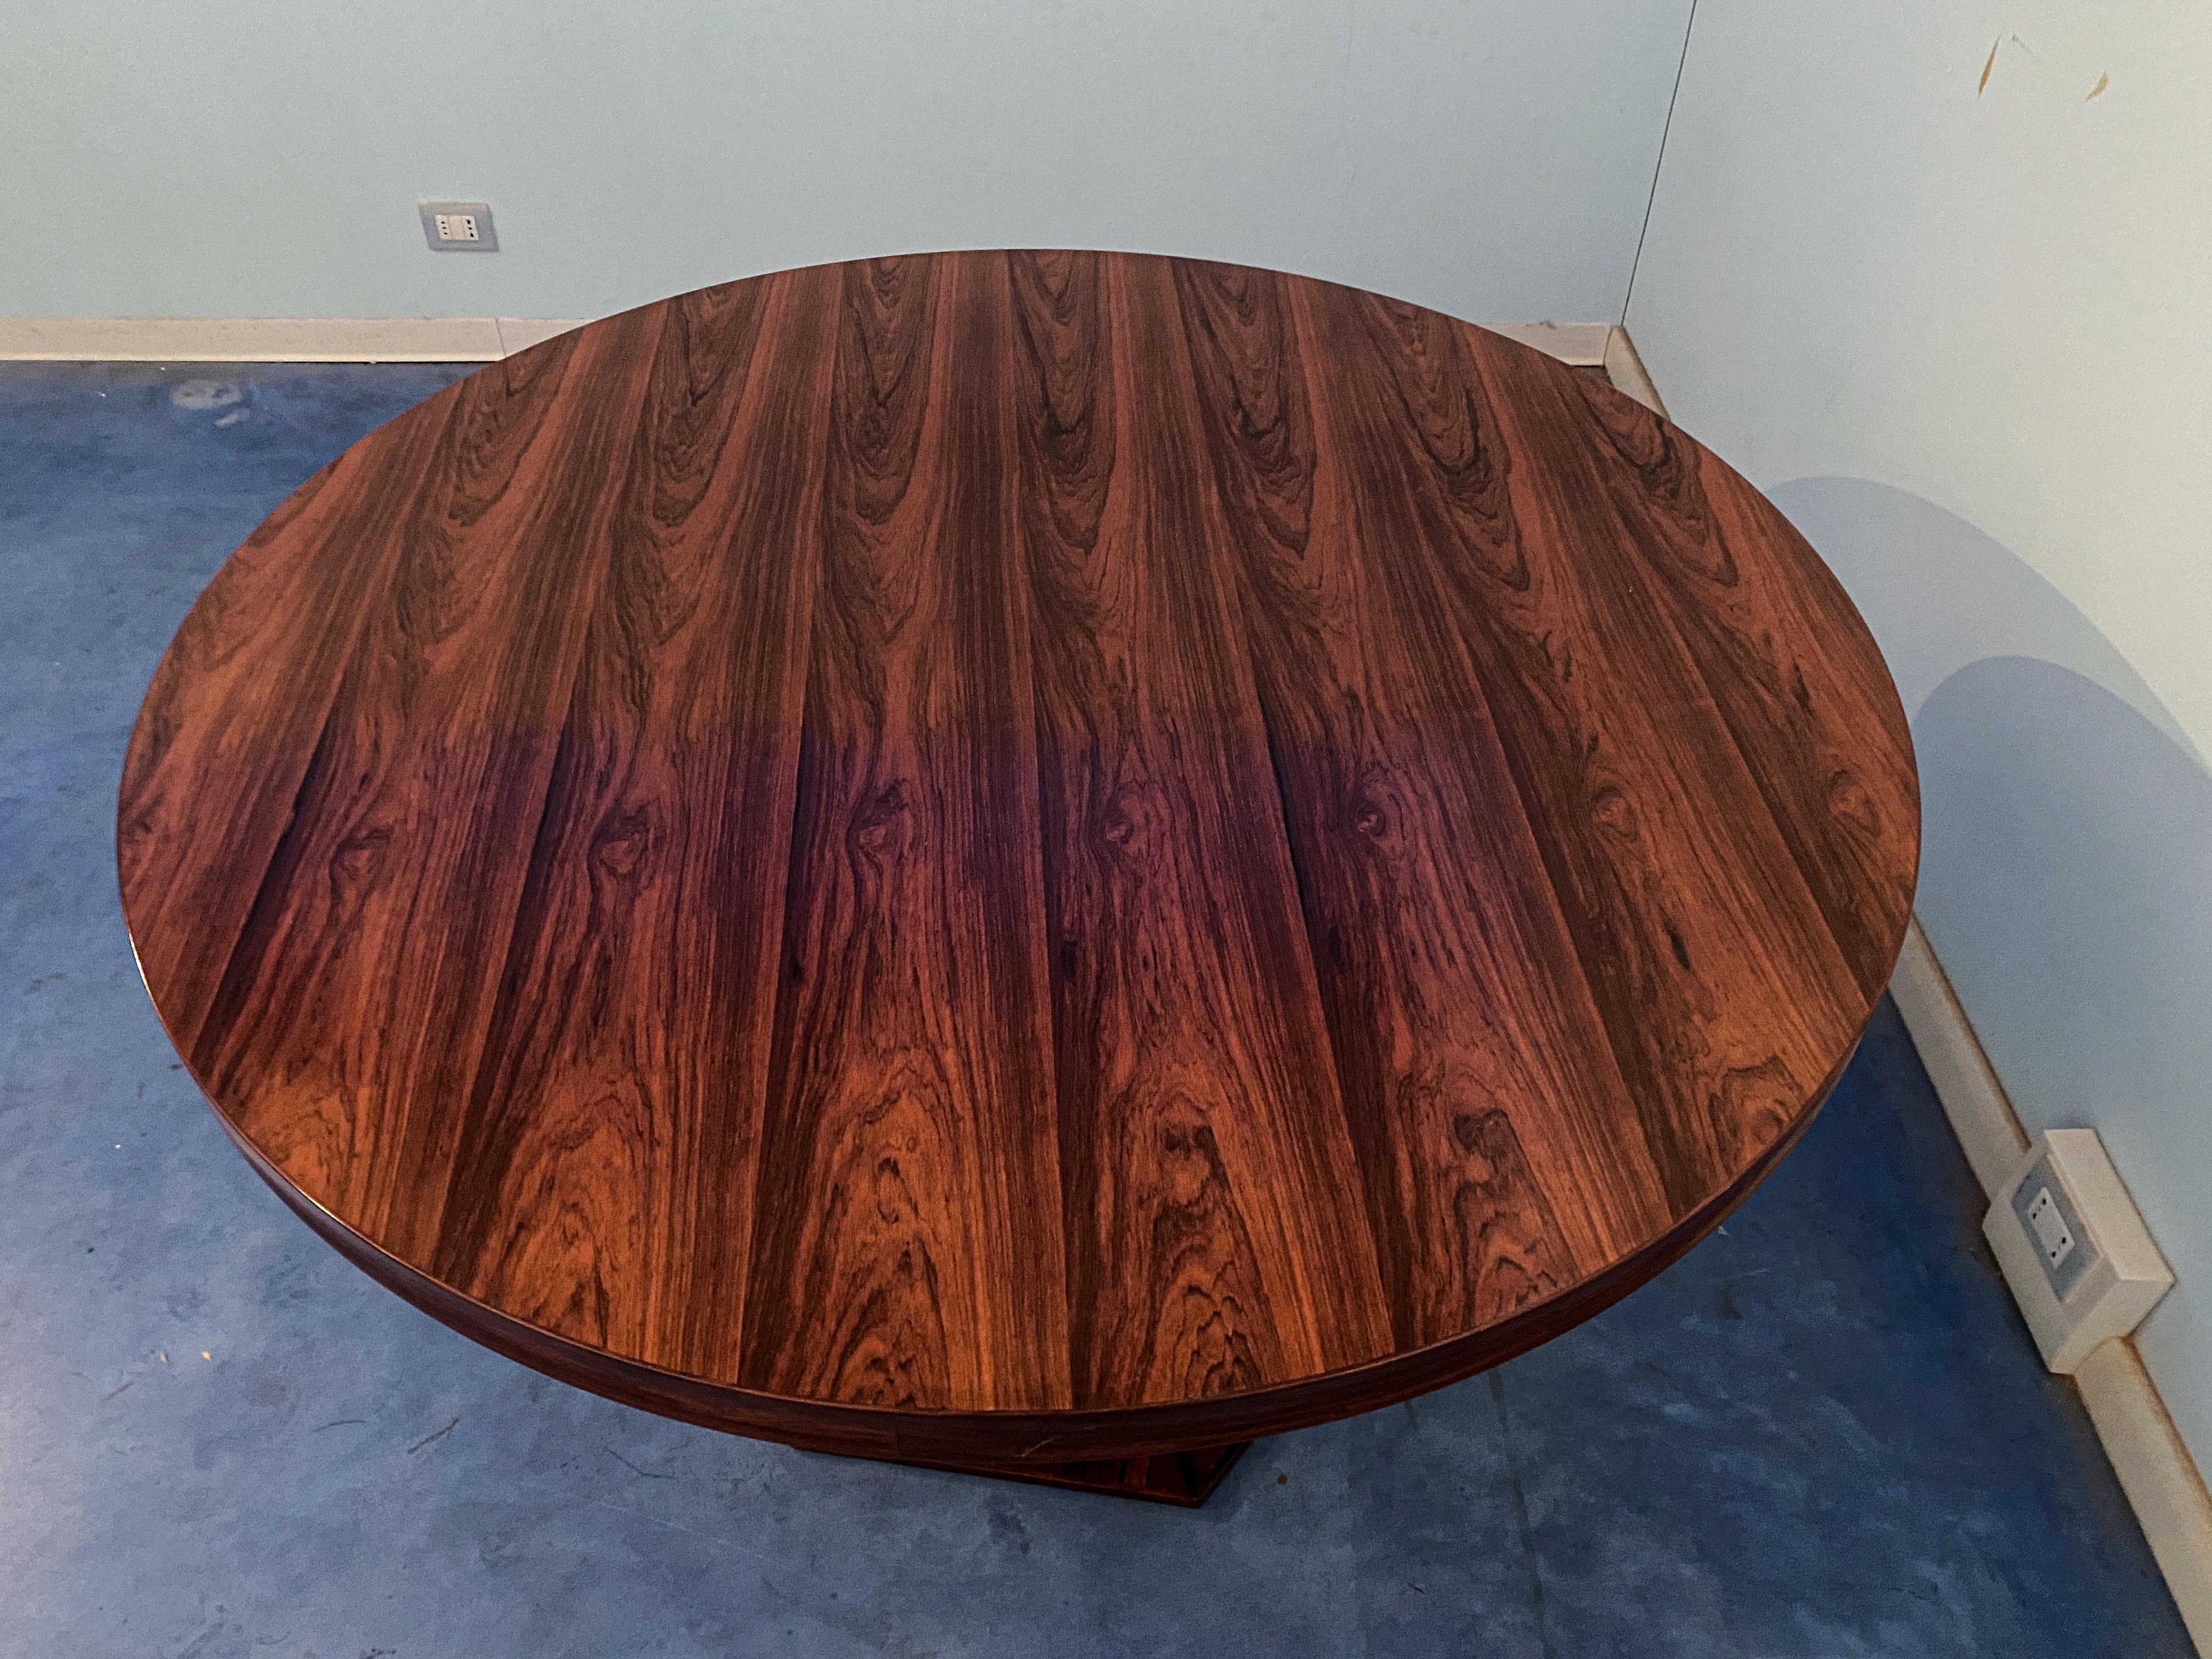 Italian Midcentury Circular Dining Table in Mahogany by Giulio Moscatelli, 1964 For Sale 2